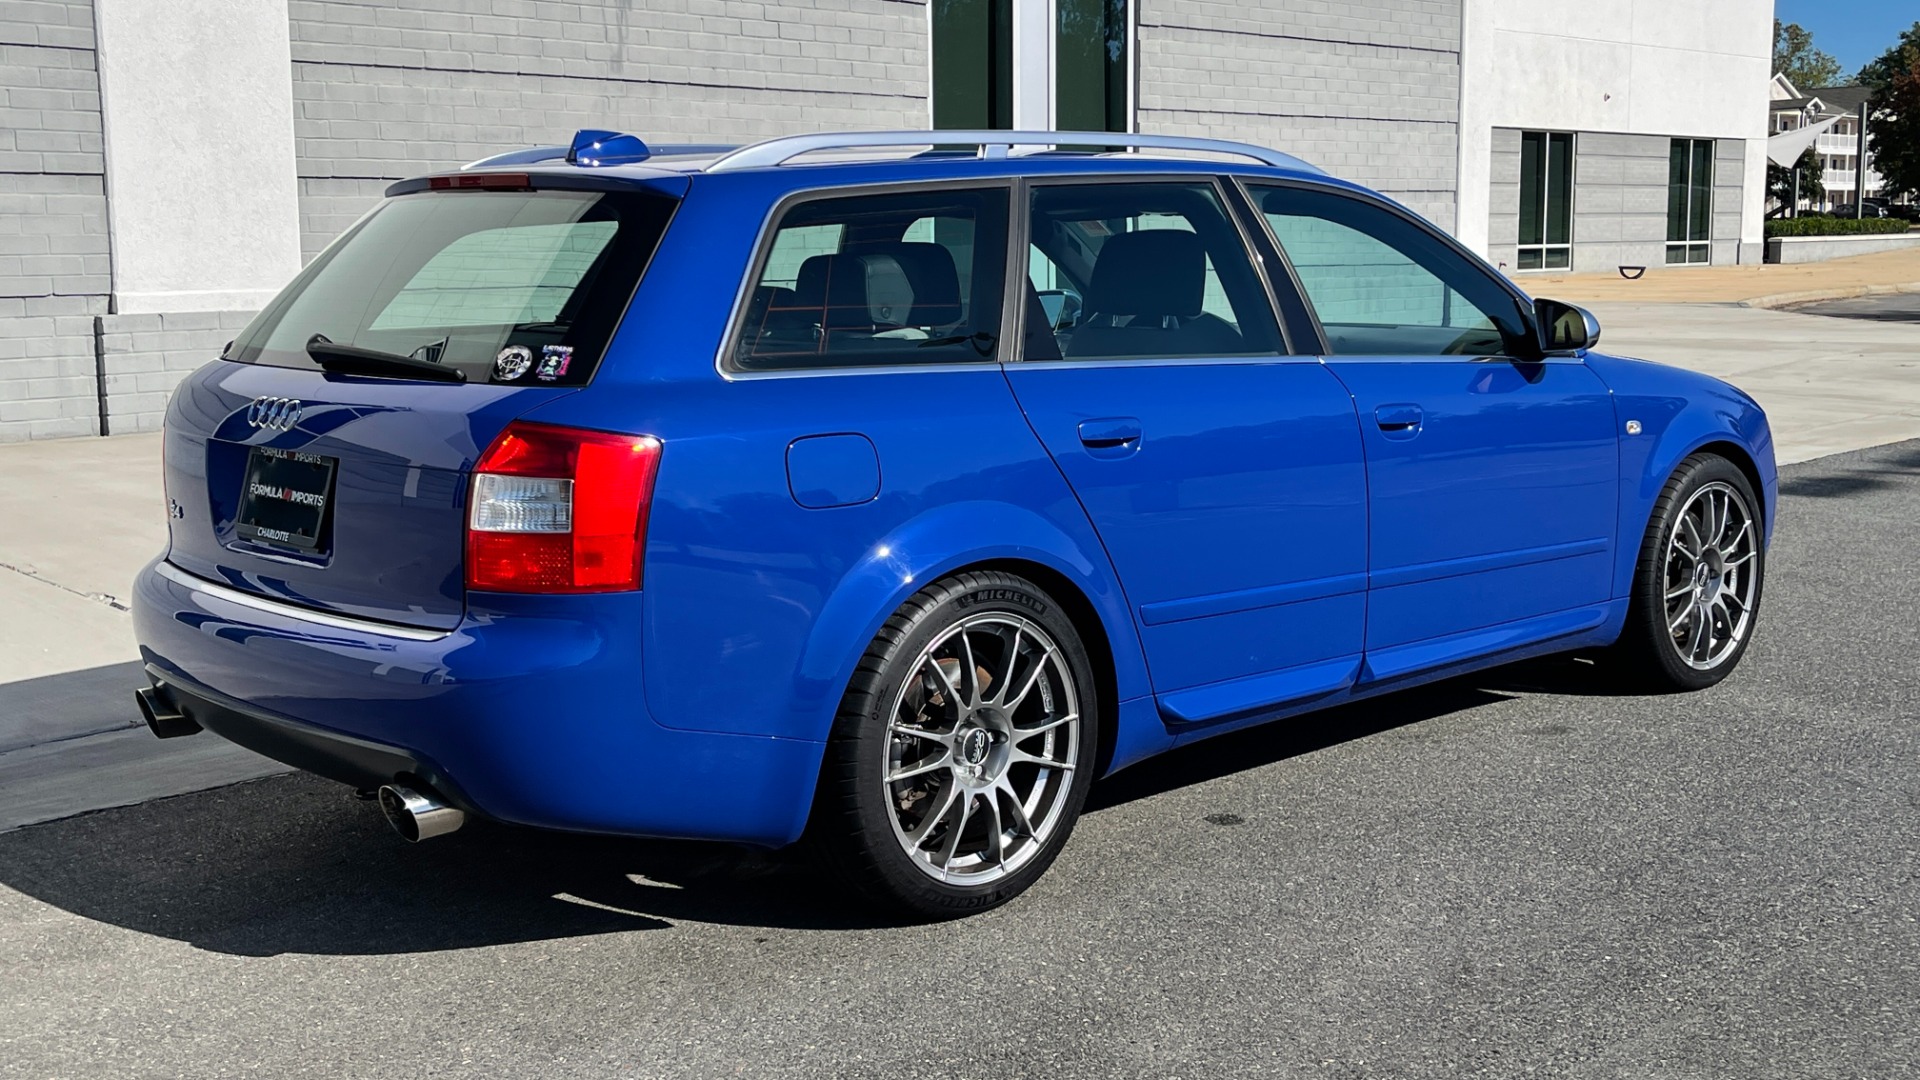 Used 2004 Audi S4 AVANT QUATTRO / VF500 SUPERCHARGED / 4.2L V8 / NOGARO BLUE PEARL for sale $32,995 at Formula Imports in Charlotte NC 28227 7